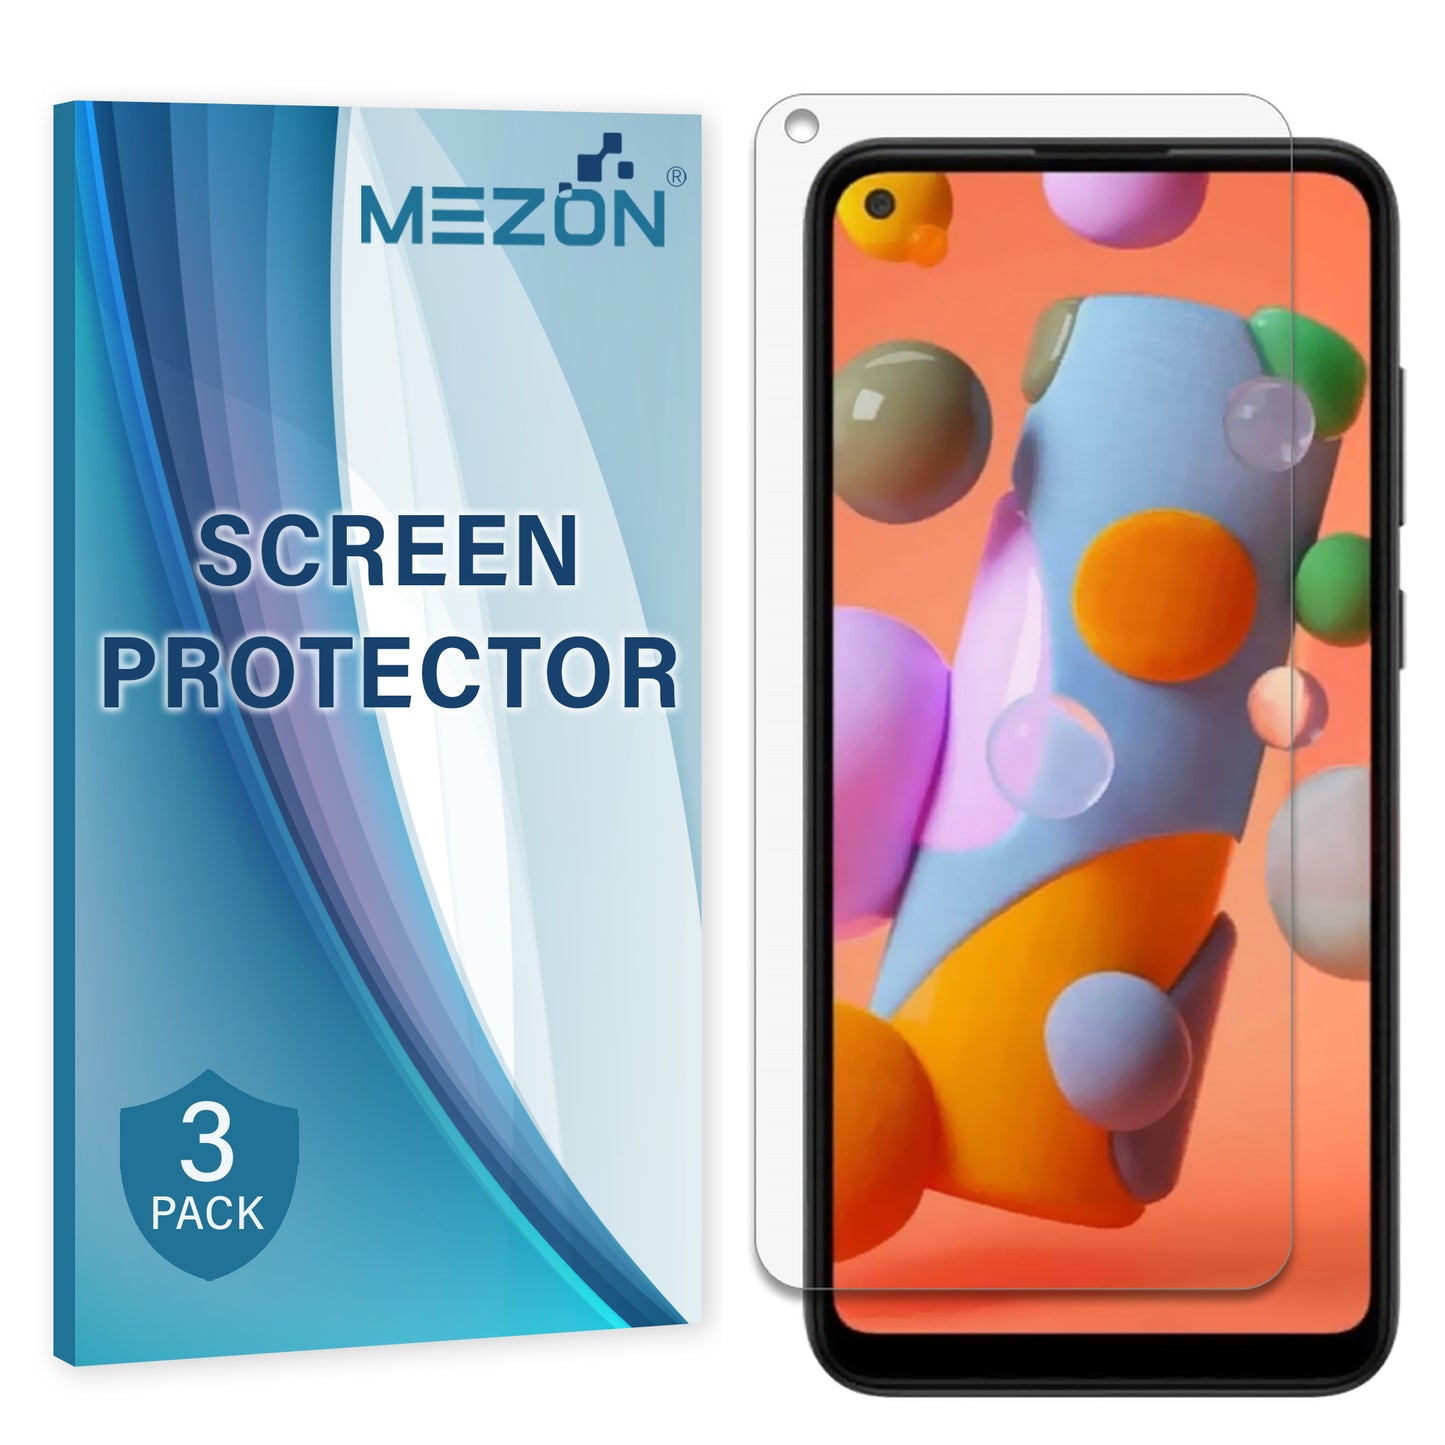 [3 Pack] MEZON Samsung Galaxy A11 Ultra Clear Screen Protector Case Friendly Film (A11, Clear)